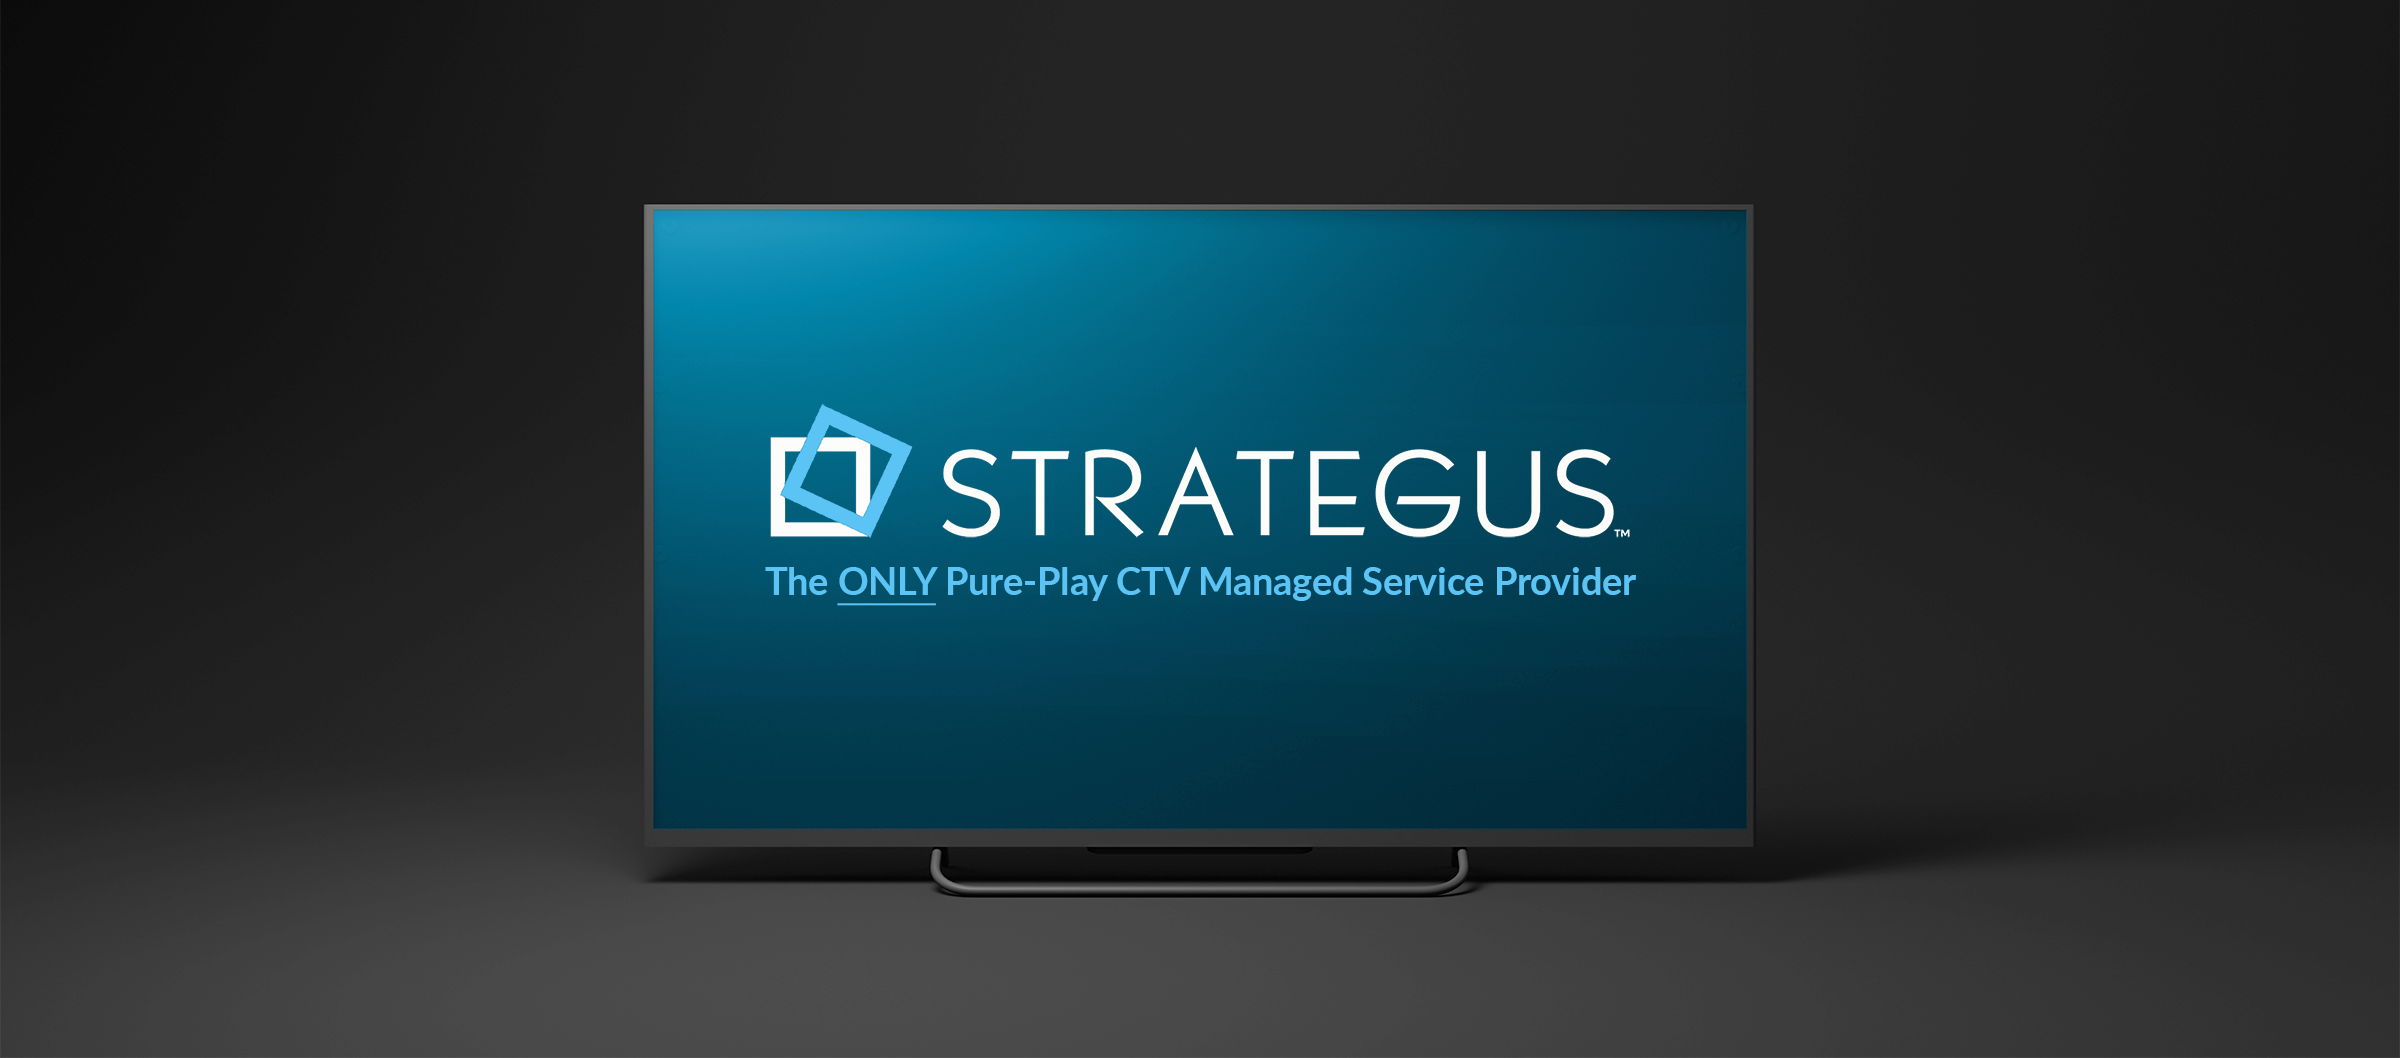 strategus pure-play ctv managed service provider - 1